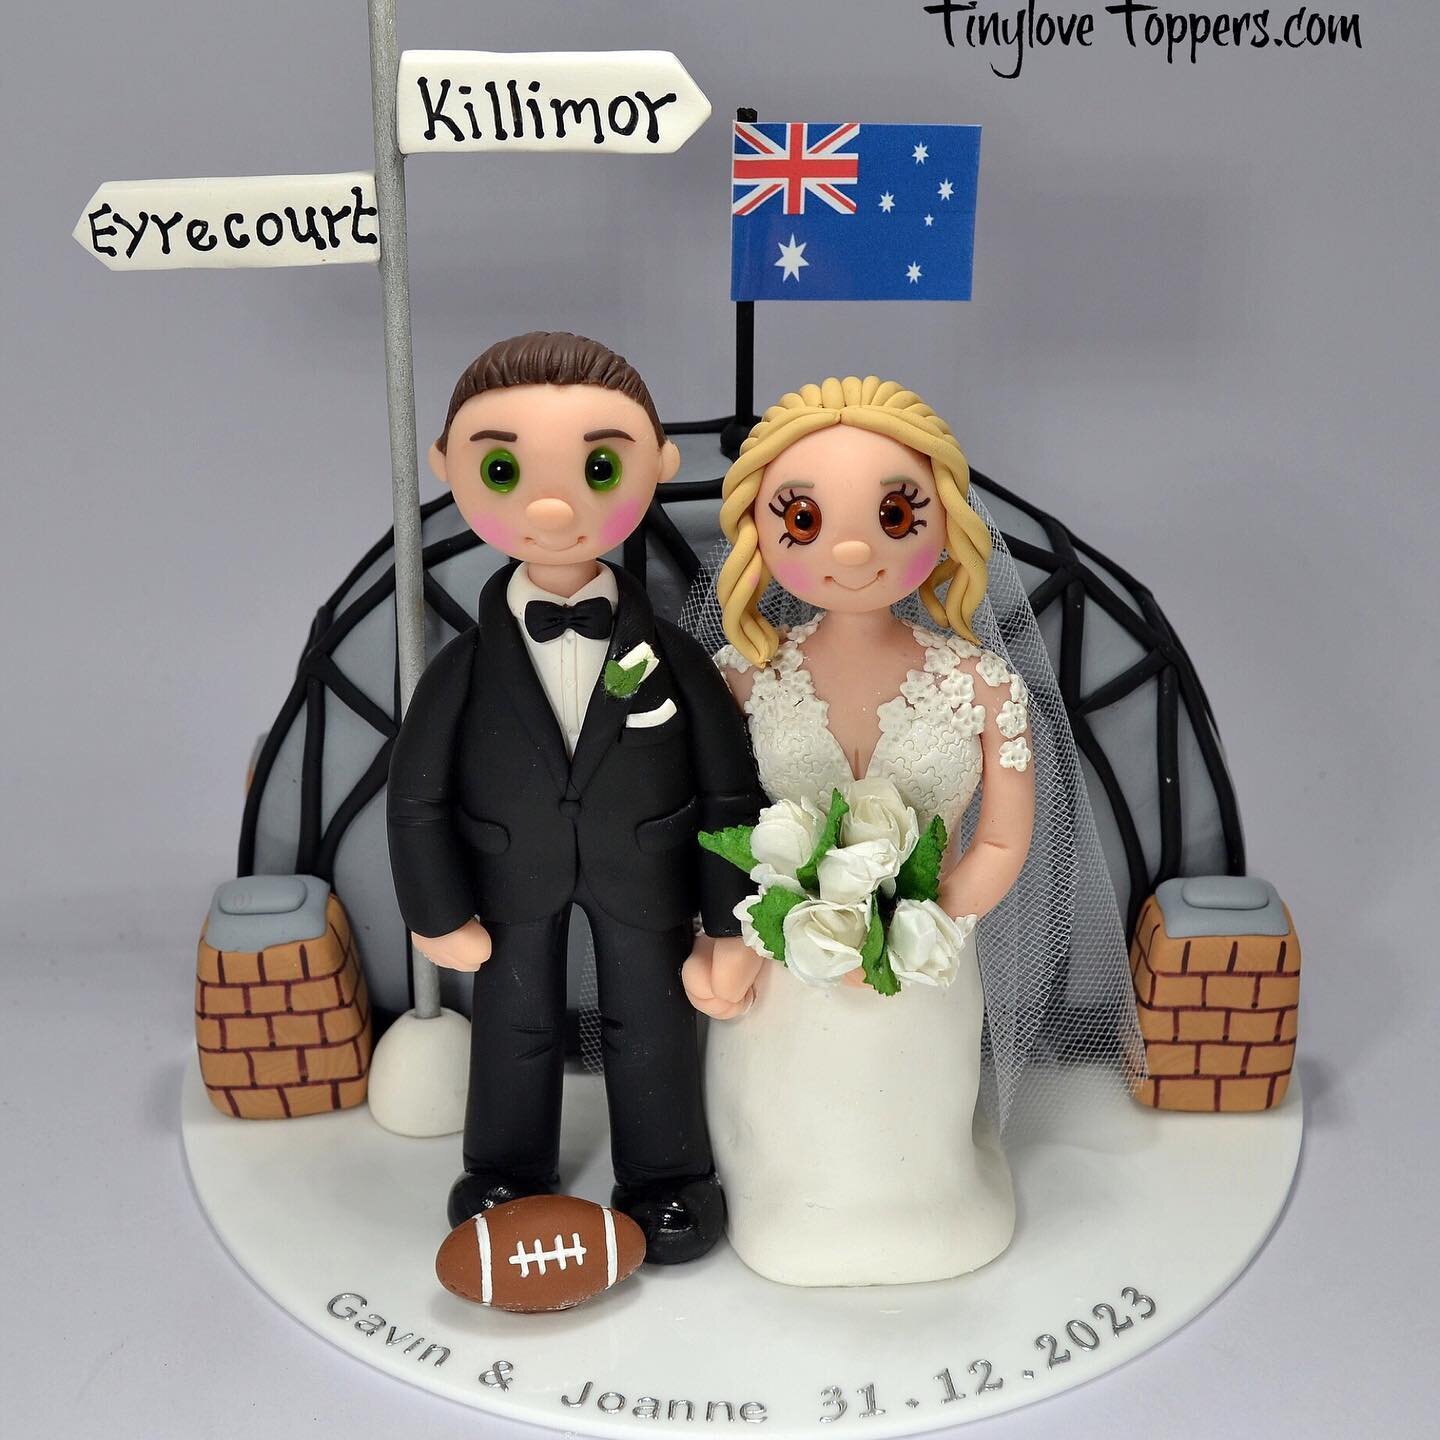 Happy New Year!!

Are you getting married in 2024 or 2025?
would you like a personalised wedding cake topper that you can keep for a lifetime? 
Personalised non edible wedding cake toppers.
made to look like you, lifelong keepsakes.
Message me if you